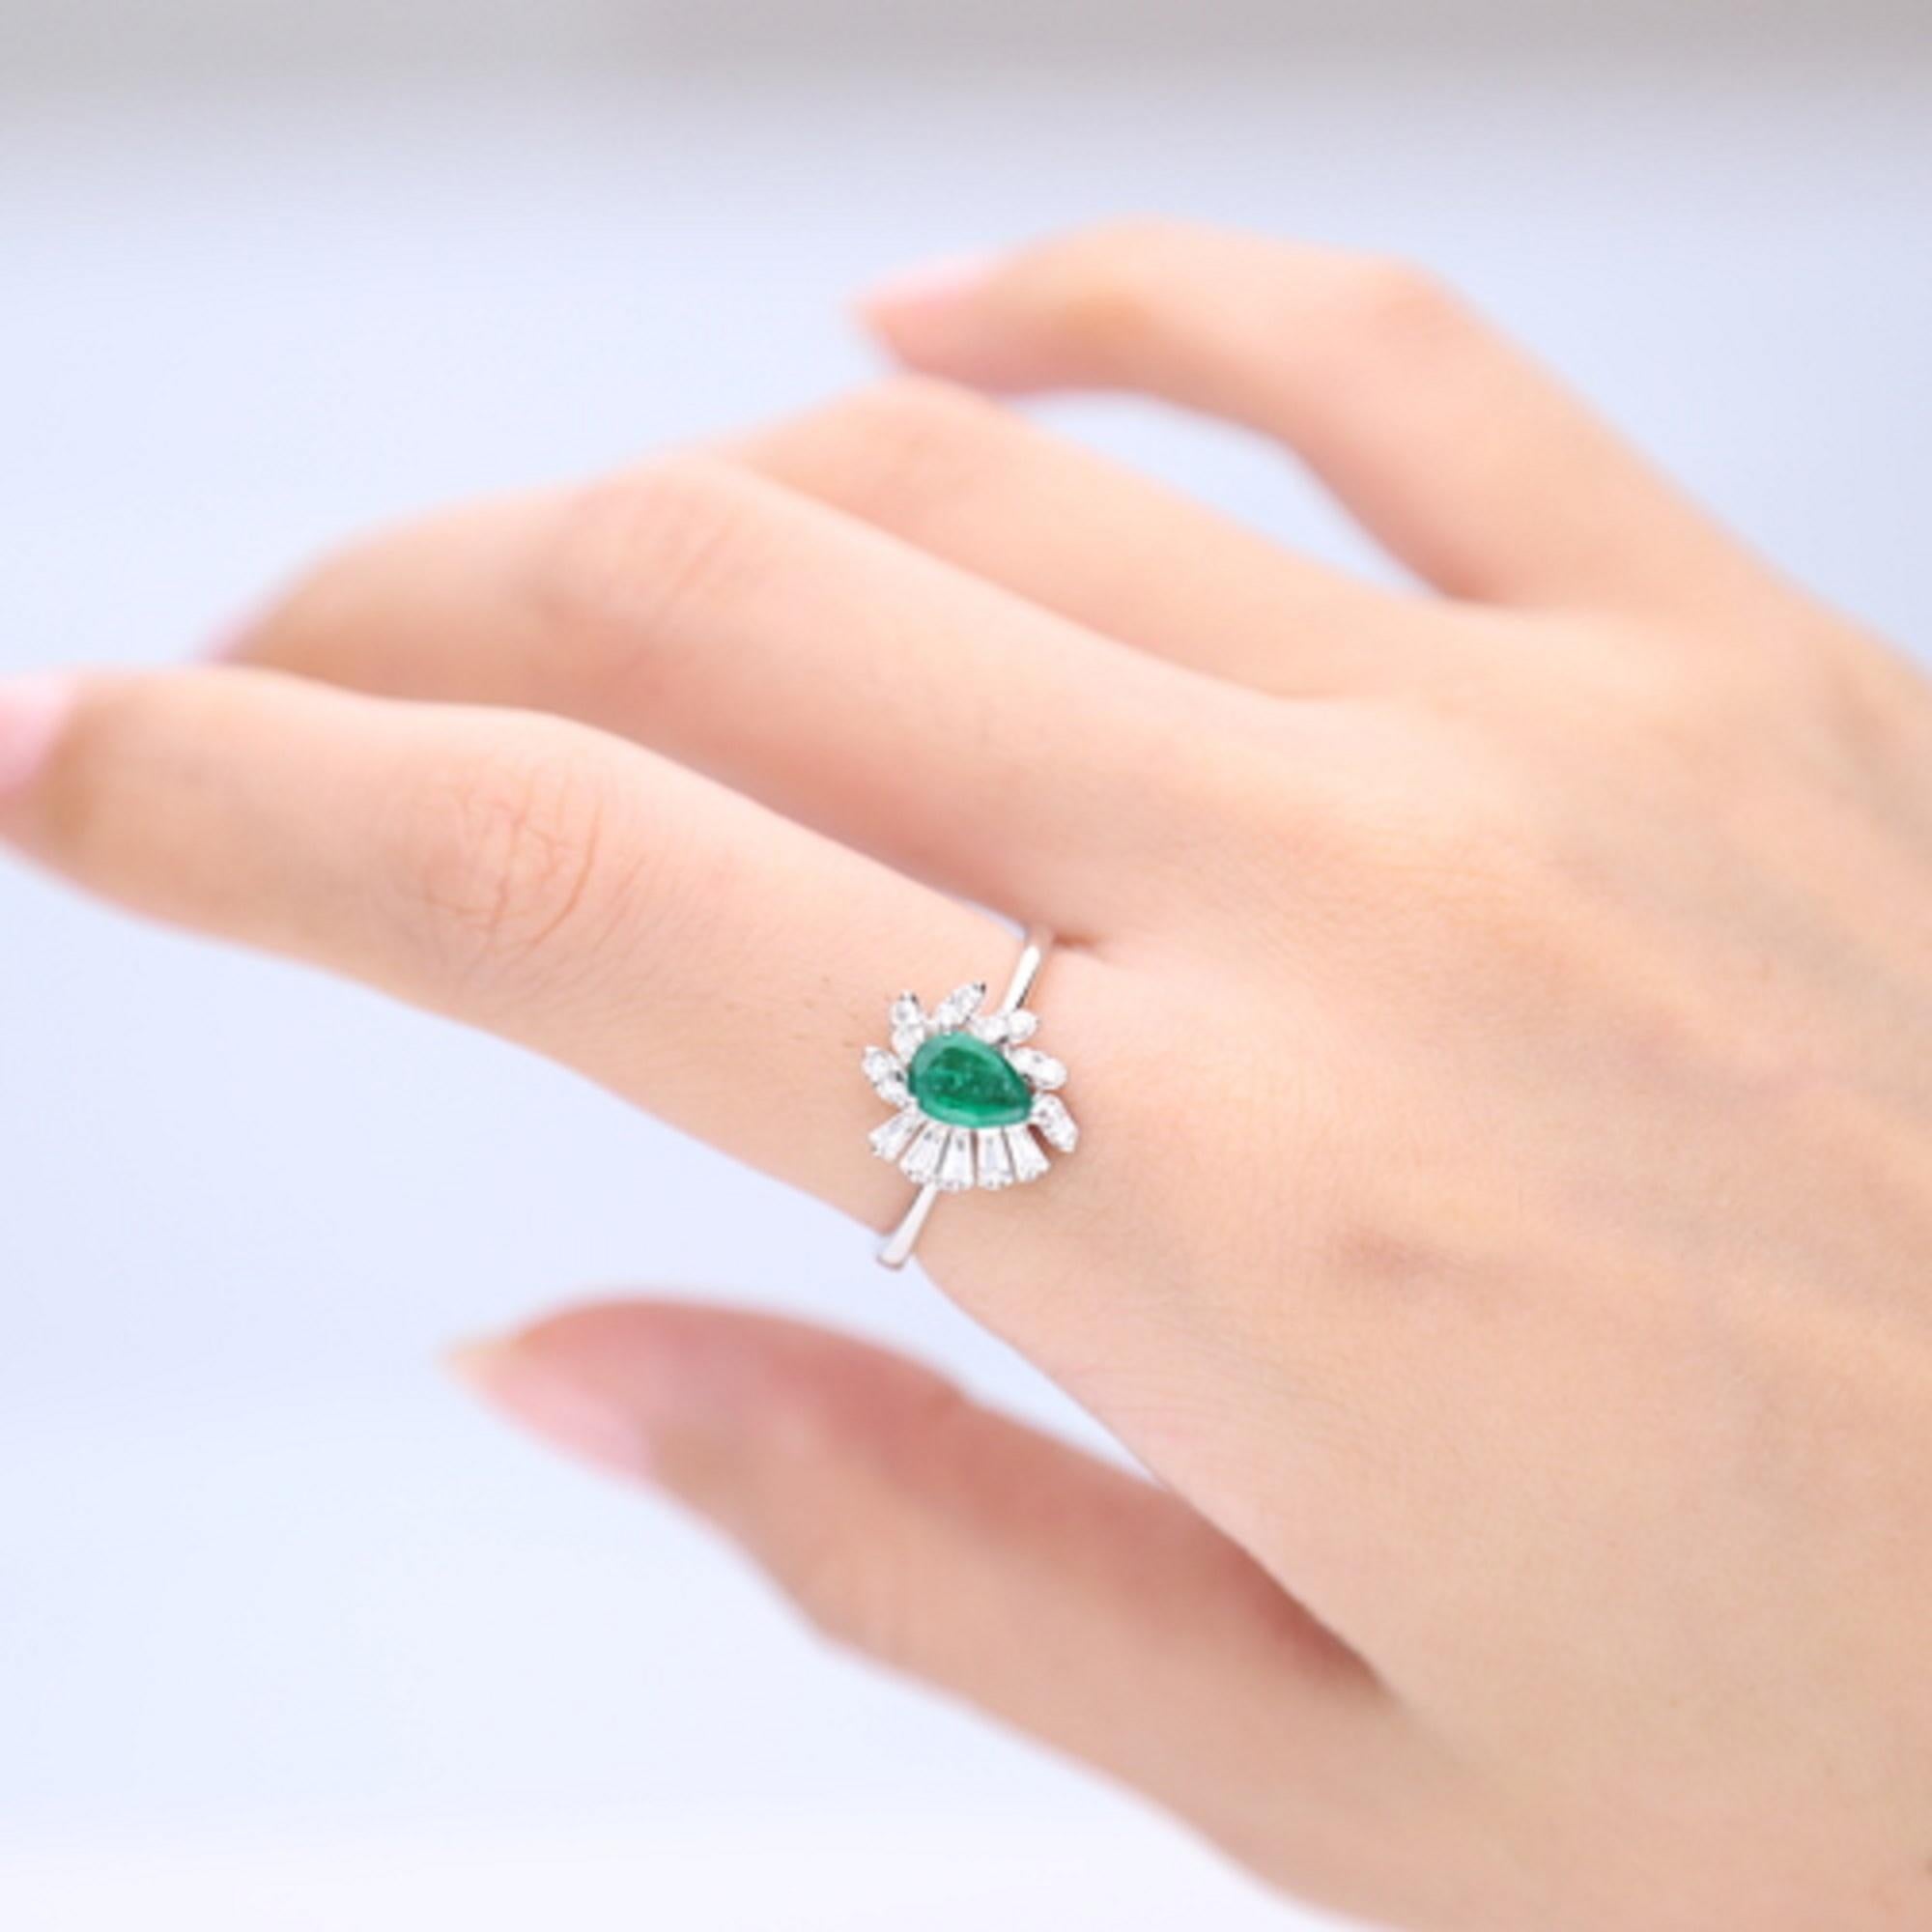 Stunning, timeless and classy eternity Unique Ring. Decorate yourself in luxury with this Gin & Grace Ring. The 18k White Gold jewelry boasts Pear cut Prong Setting Natural Zambian Emerald (1 pcs) 0.47 Carat, along with Natural Round cut white